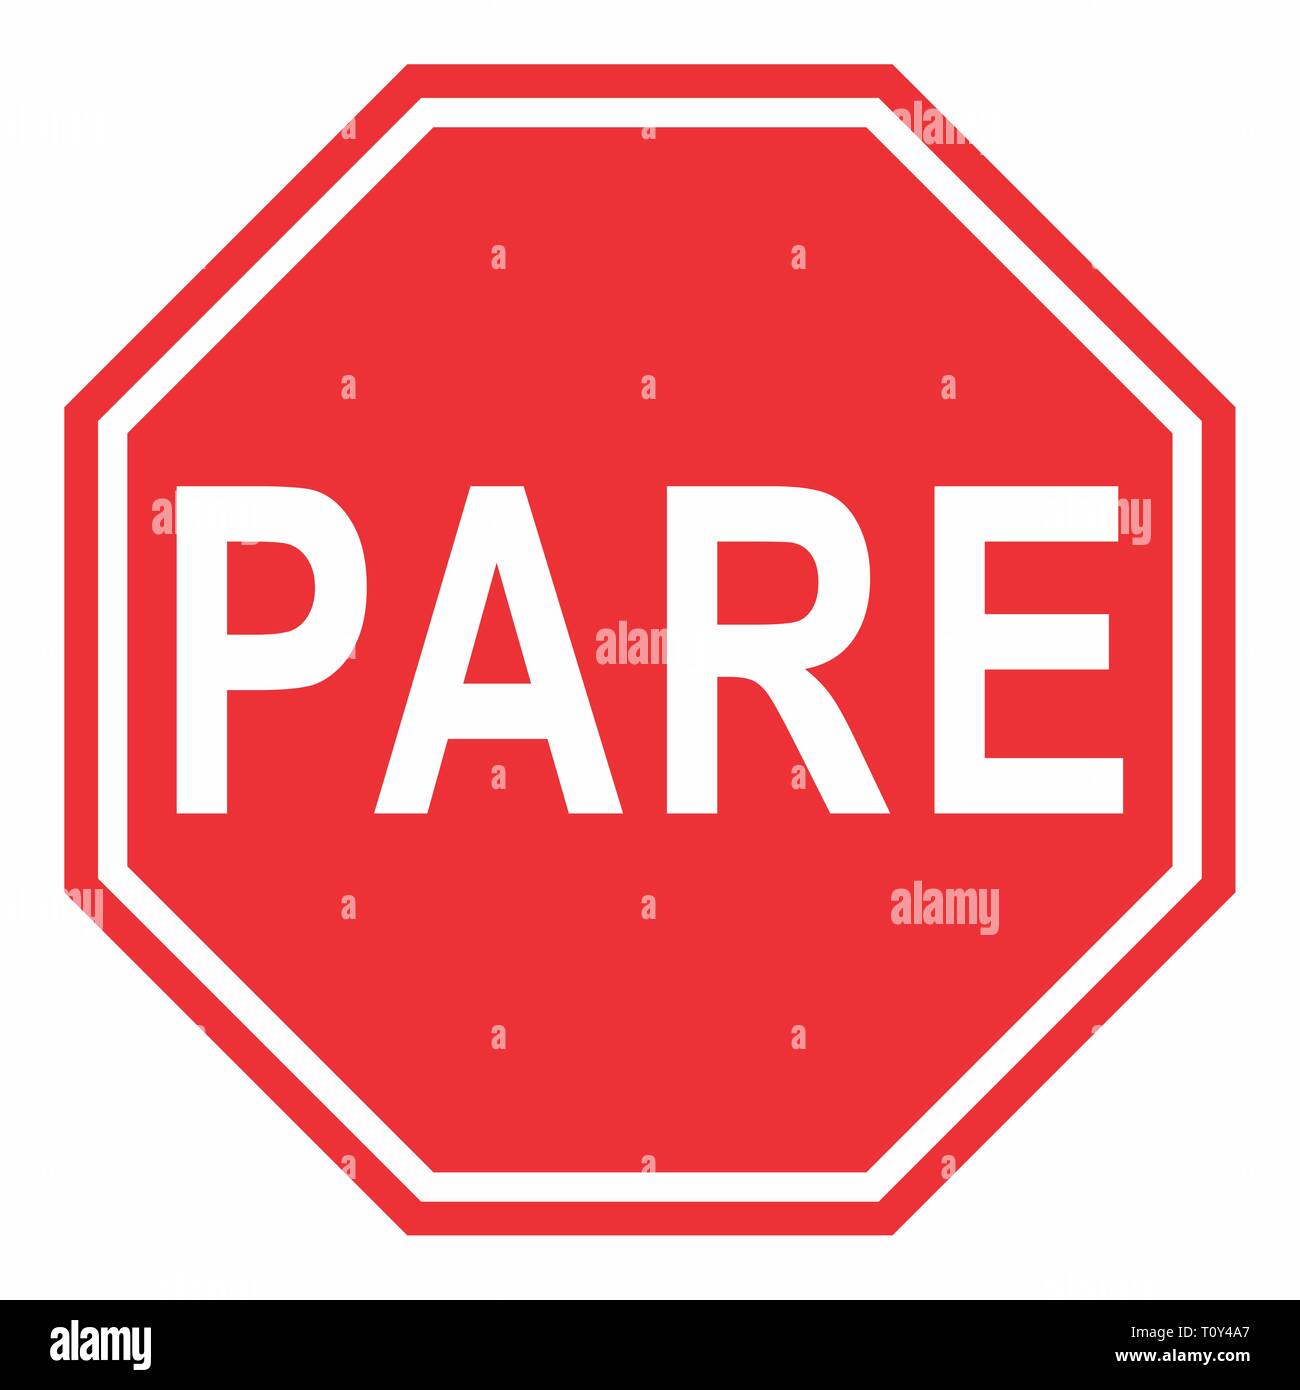 Pare traffic sign Stock Vector